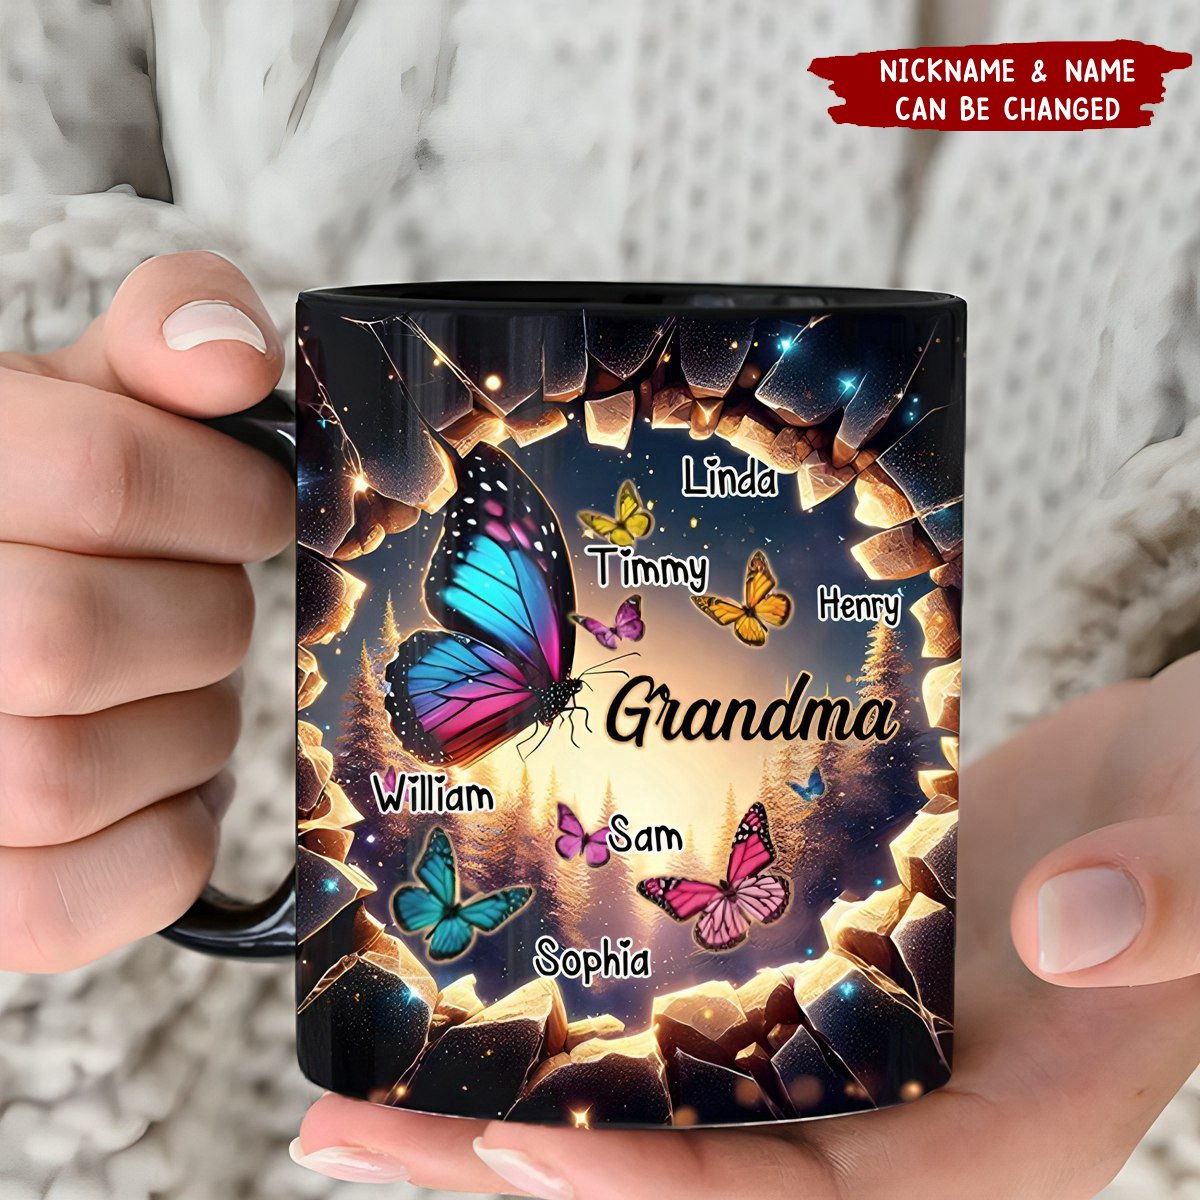 3D Effect Hole In A Wall Grandma With Butterfly Kids Personalized Black Mug